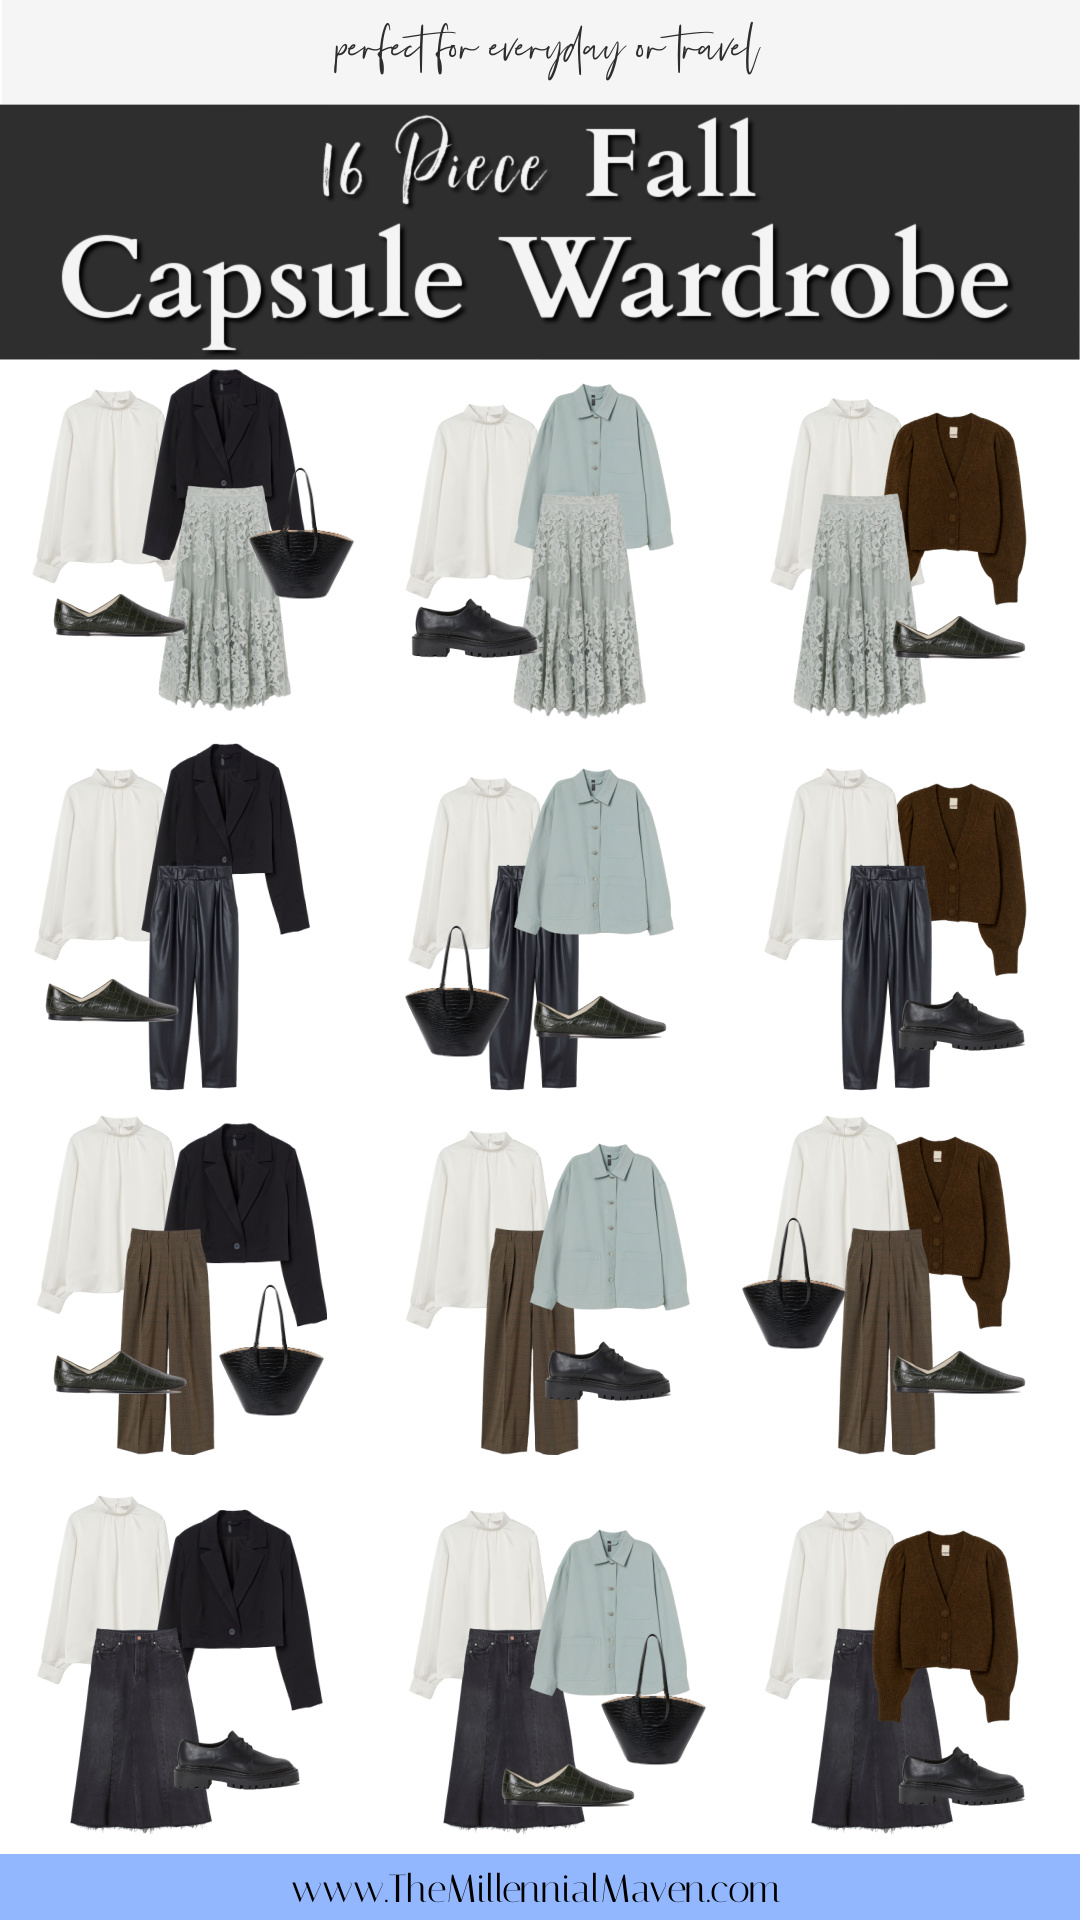 Fall Capsule Wardrobe 2020 7 Outfit Combinations